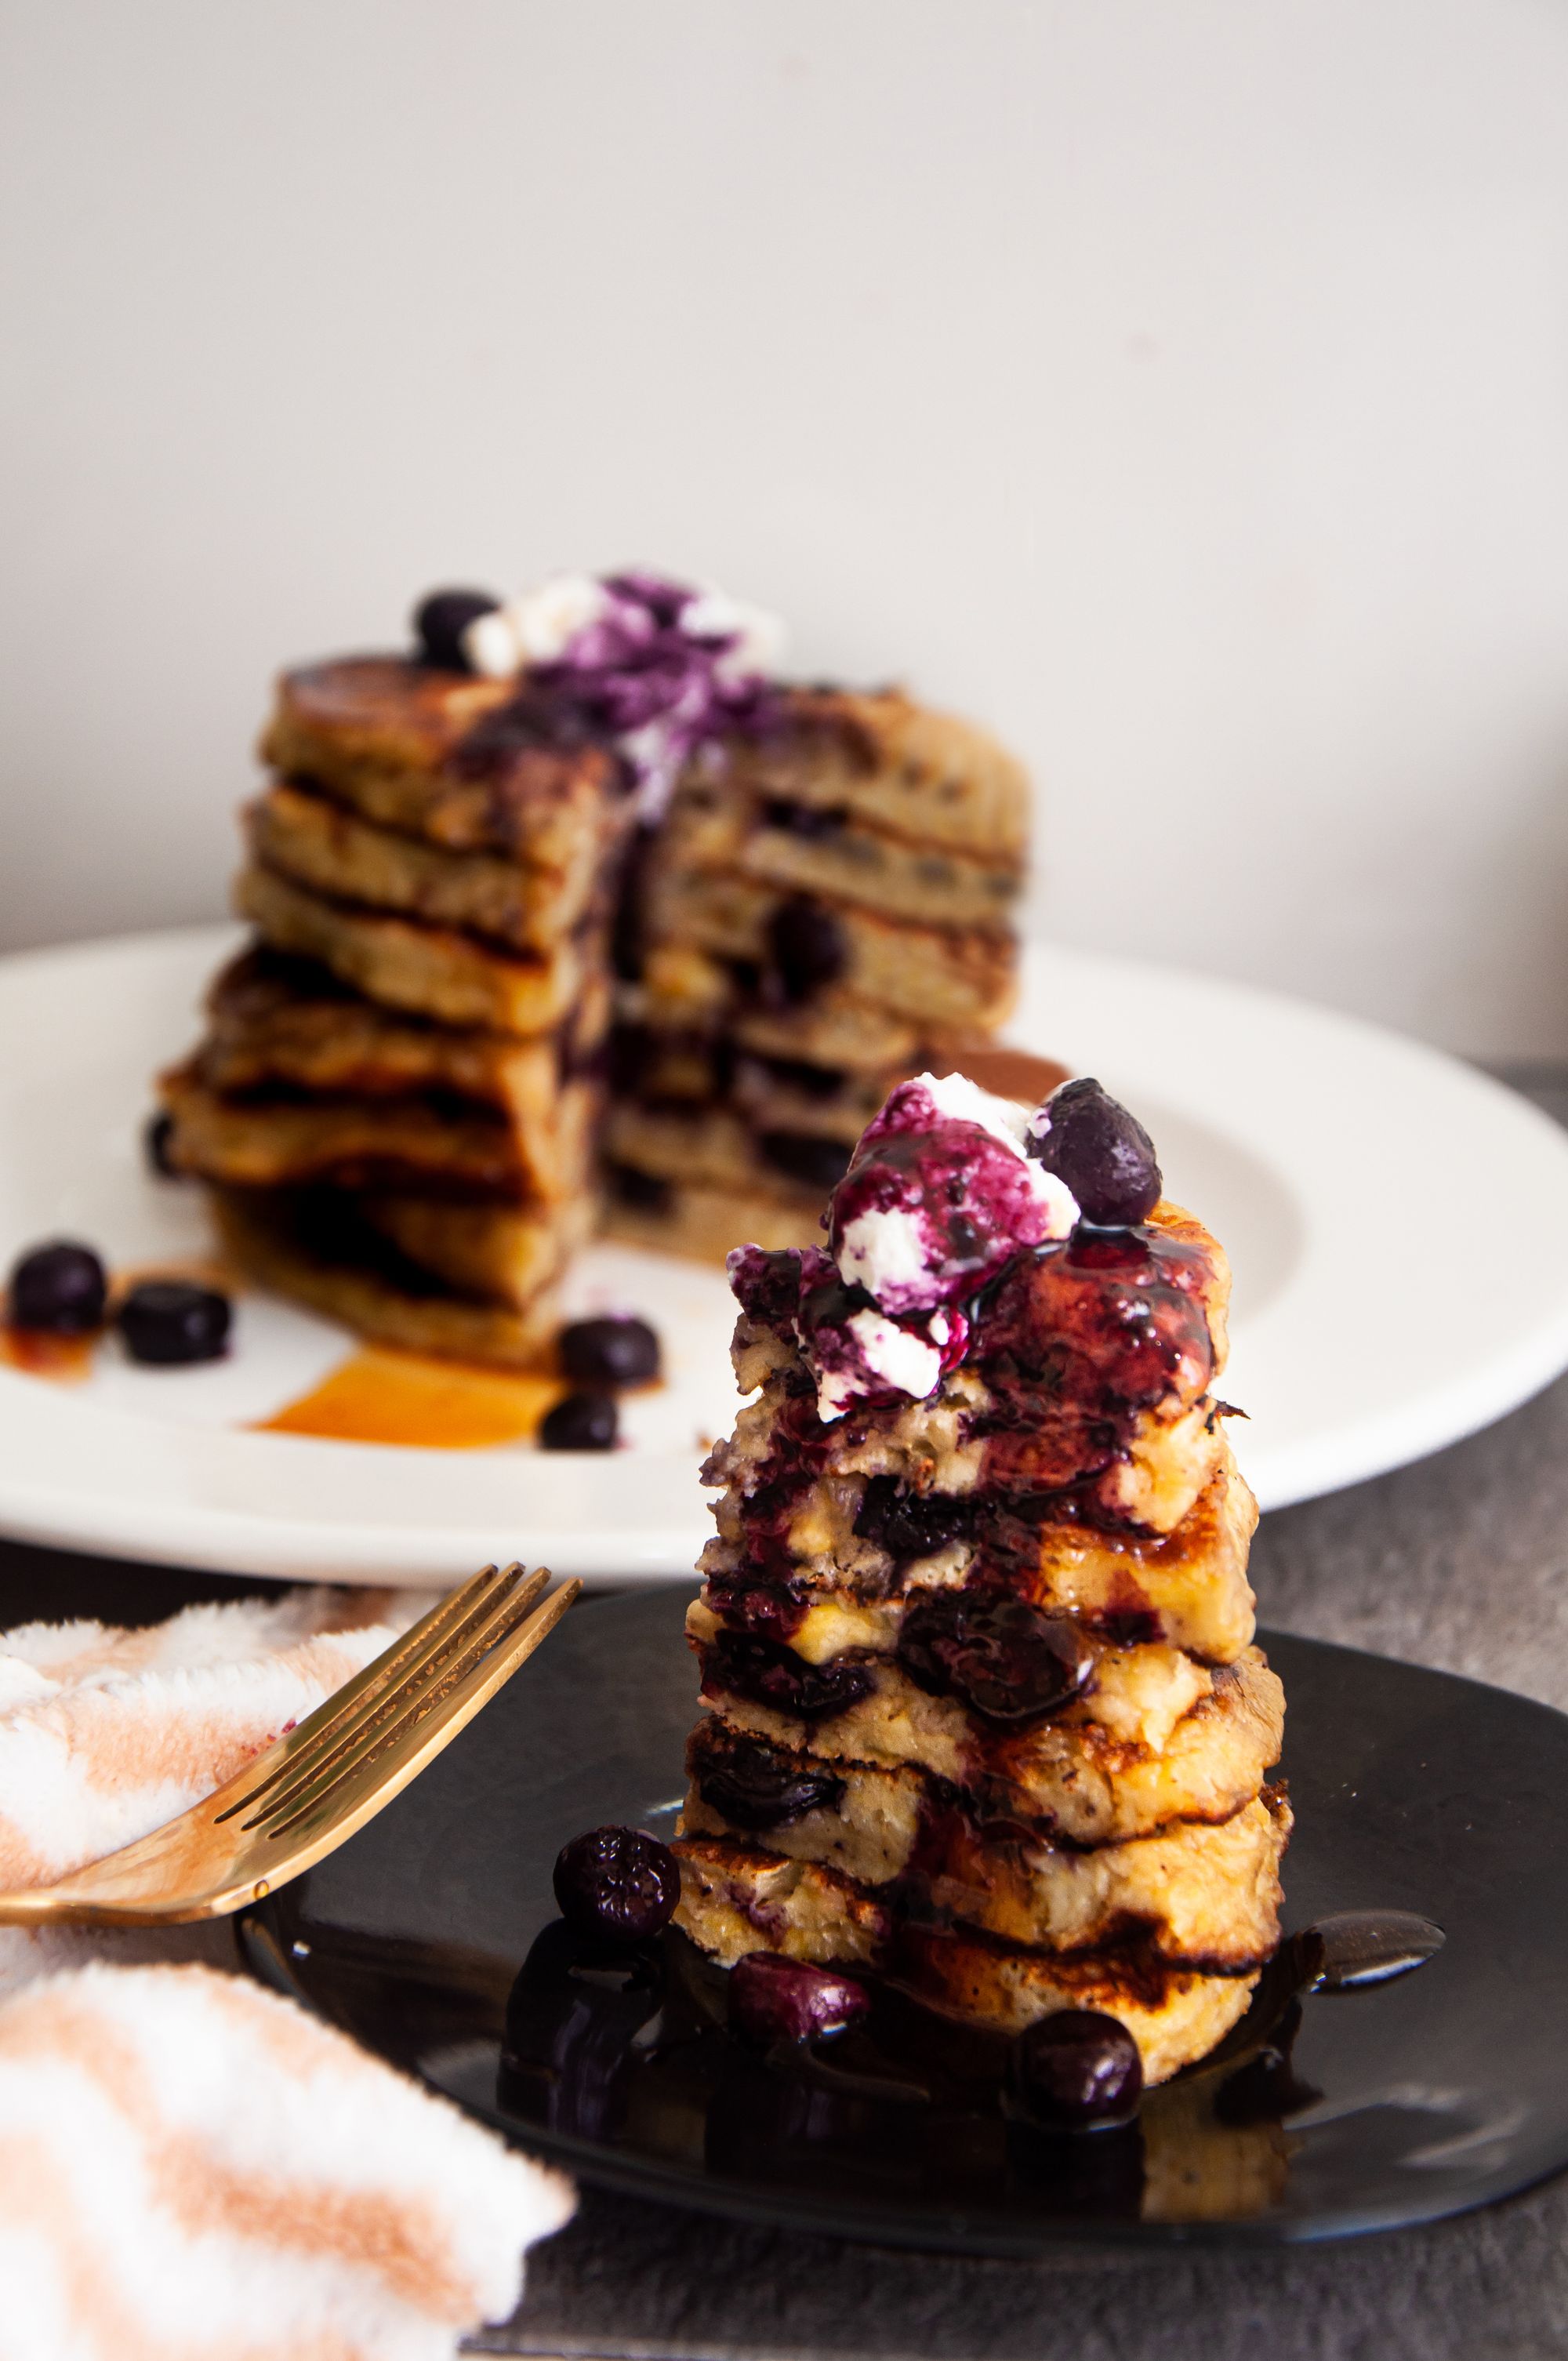 A bite of Banana and Blueberry Pancakes